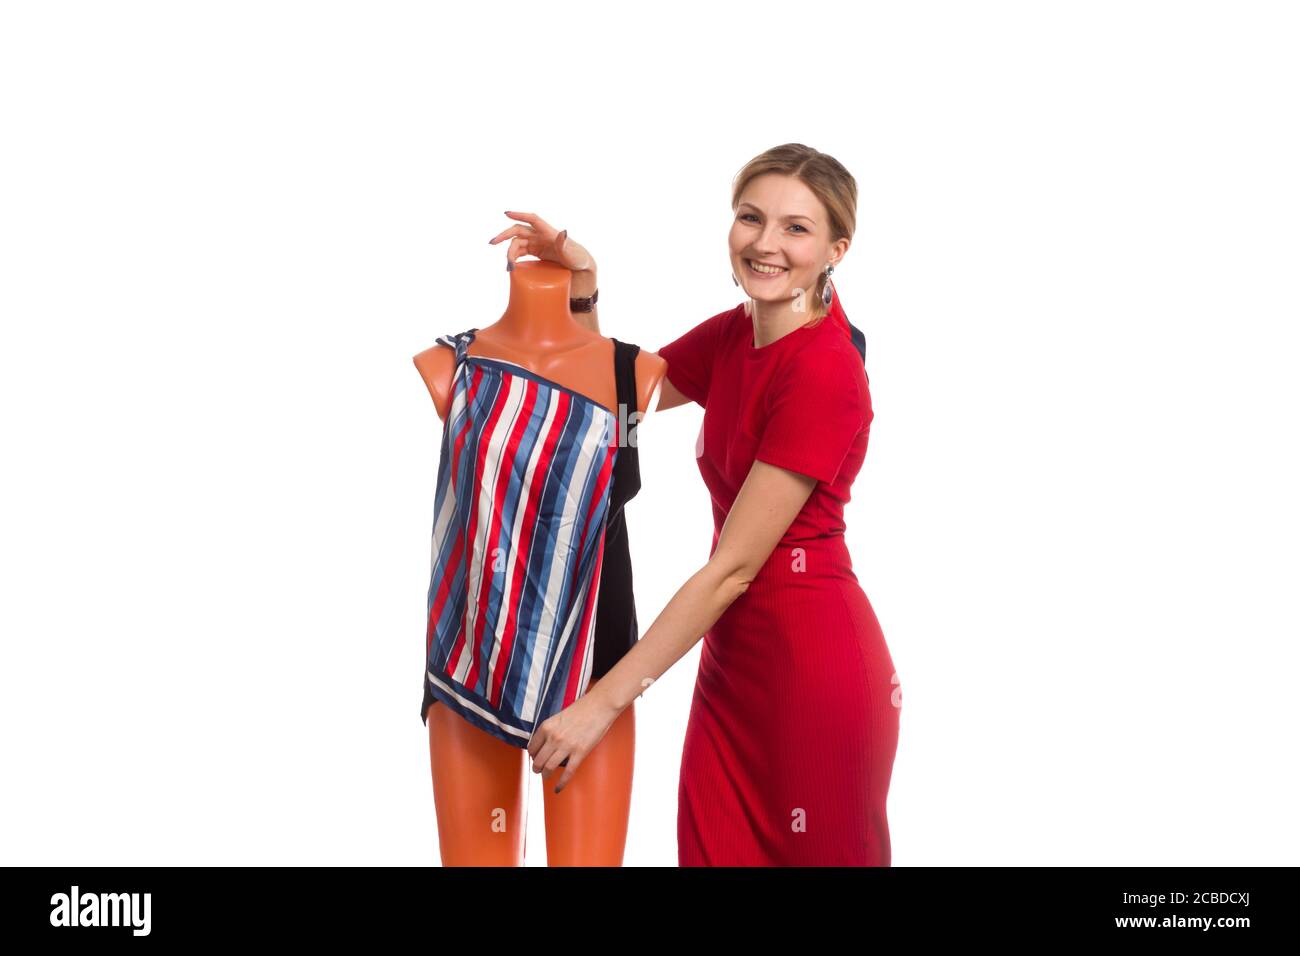 A young woman in a red dress puts a striped dress on a mannequin. isolated on white Stock Photo